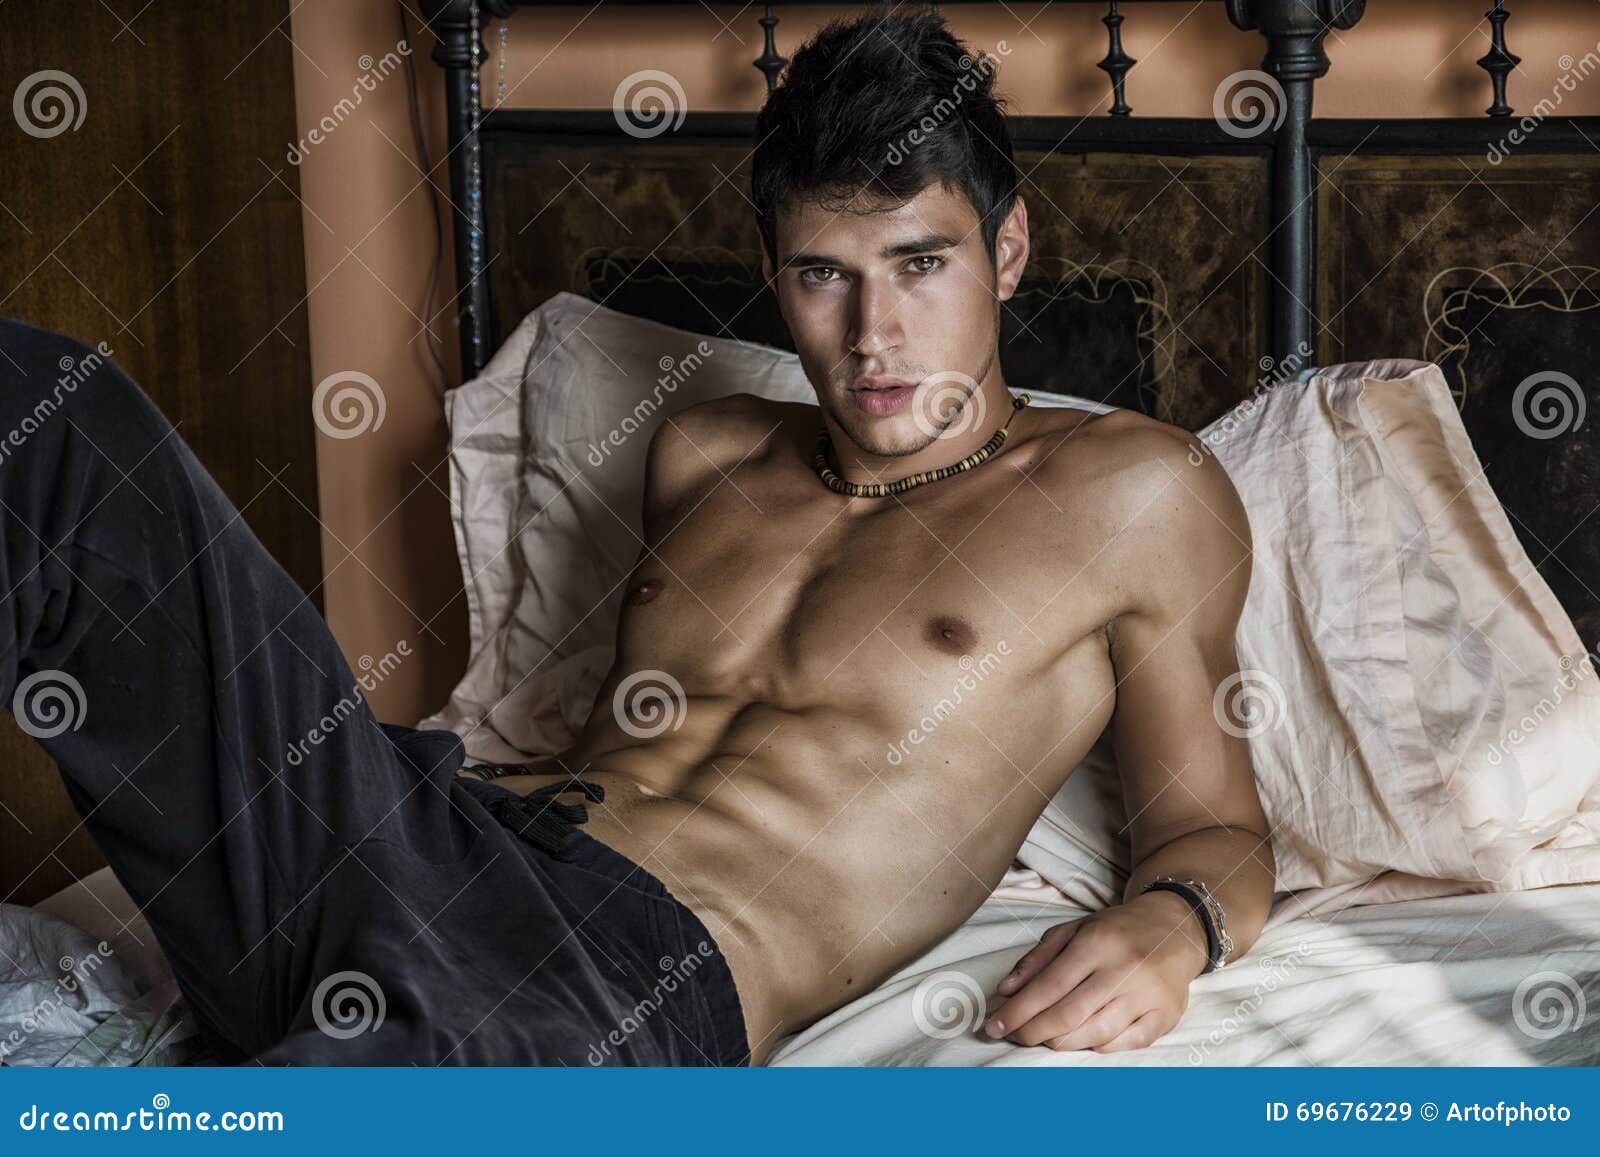 Shirtless Male Model Lying Alone On His Bed Stock Image Image Of Single Shirtless 69676229